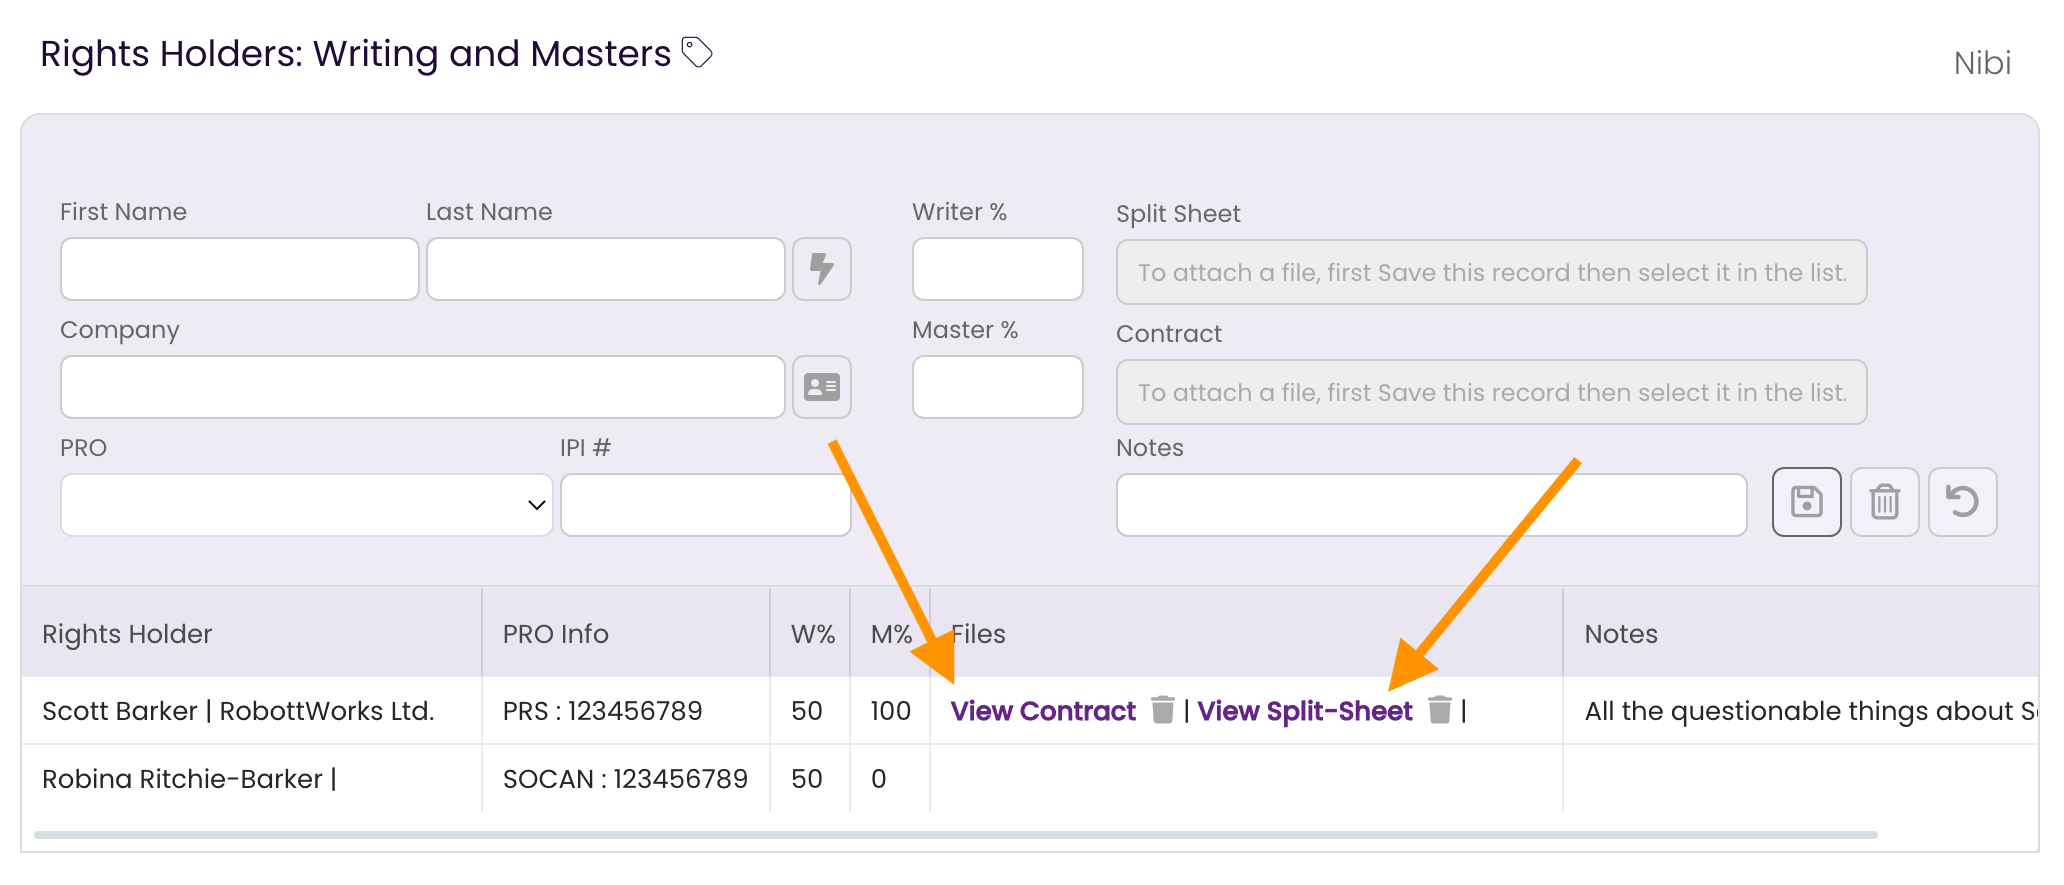 The Rights Tab showing where to click to view the Split Sheet and the Contract for the Rights Holder record.